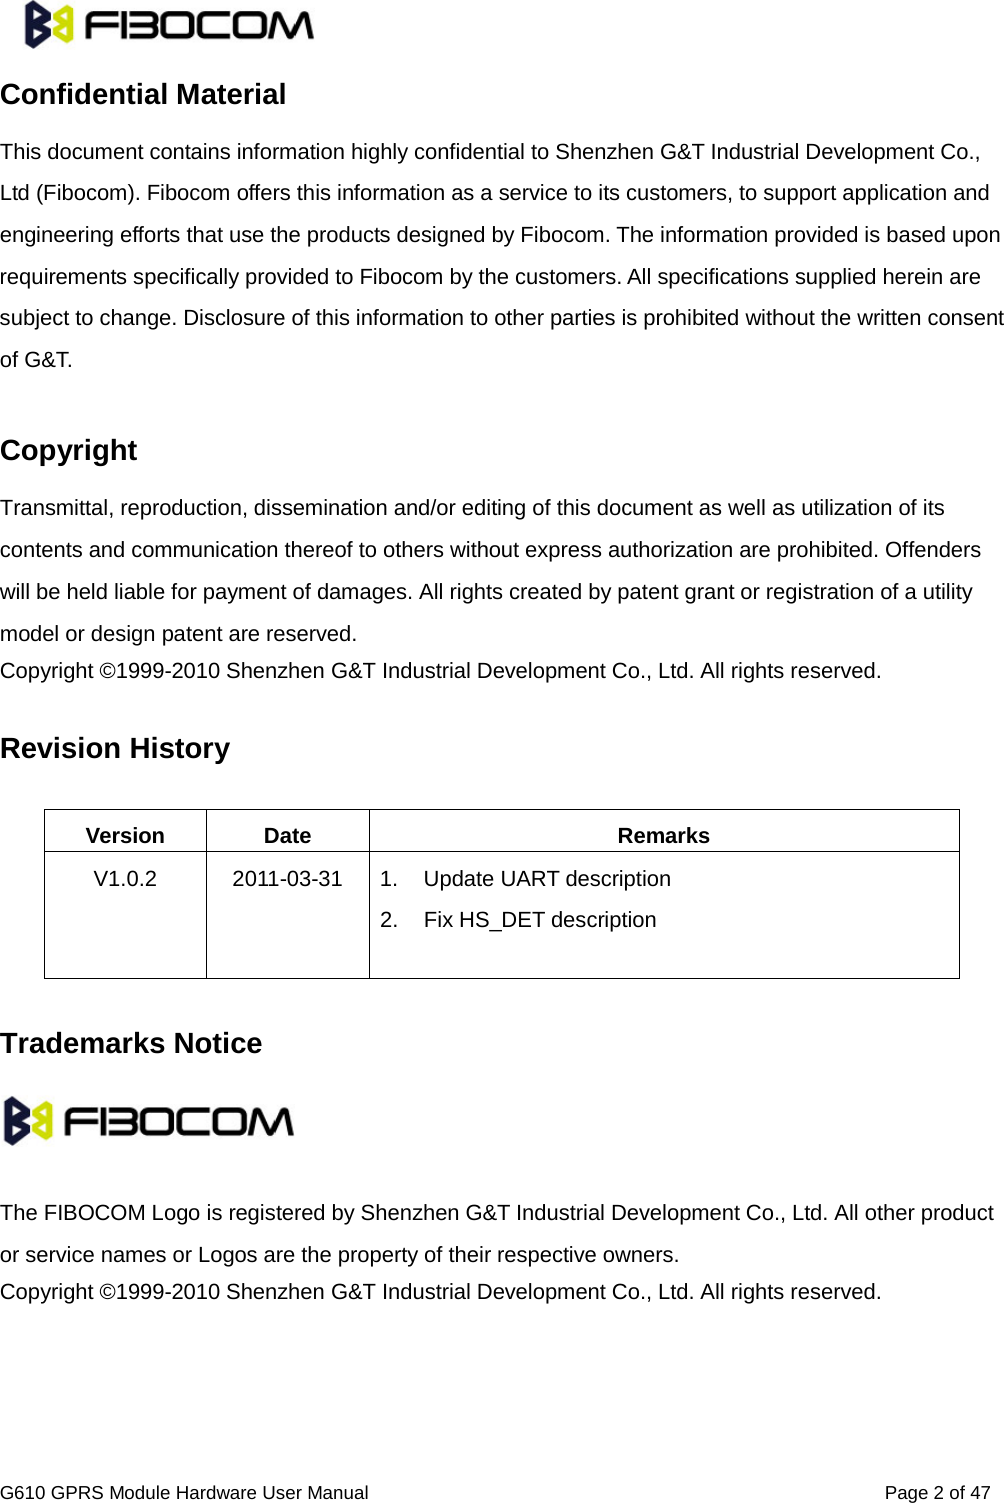                                                                                                                          G610 GPRS Module Hardware User Manual                                                          Page 2 of 47  Confidential Material This document contains information highly confidential to Shenzhen G&amp;T Industrial Development Co., Ltd (Fibocom). Fibocom offers this information as a service to its customers, to support application and engineering efforts that use the products designed by Fibocom. The information provided is based upon requirements specifically provided to Fibocom by the customers. All specifications supplied herein are subject to change. Disclosure of this information to other parties is prohibited without the written consent of G&amp;T.  Copyright Transmittal, reproduction, dissemination and/or editing of this document as well as utilization of its contents and communication thereof to others without express authorization are prohibited. Offenders will be held liable for payment of damages. All rights created by patent grant or registration of a utility model or design patent are reserved. Copyright ©1999-2010 Shenzhen G&amp;T Industrial Development Co., Ltd. All rights reserved.    Revision History  Version Date Remarks V1.0.2 2011-03-31 1. Update UART description 2. Fix HS_DET description   Trademarks Notice    The FIBOCOM Logo is registered by Shenzhen G&amp;T Industrial Development Co., Ltd. All other product or service names or Logos are the property of their respective owners. Copyright ©1999-2010 Shenzhen G&amp;T Industrial Development Co., Ltd. All rights reserved.      